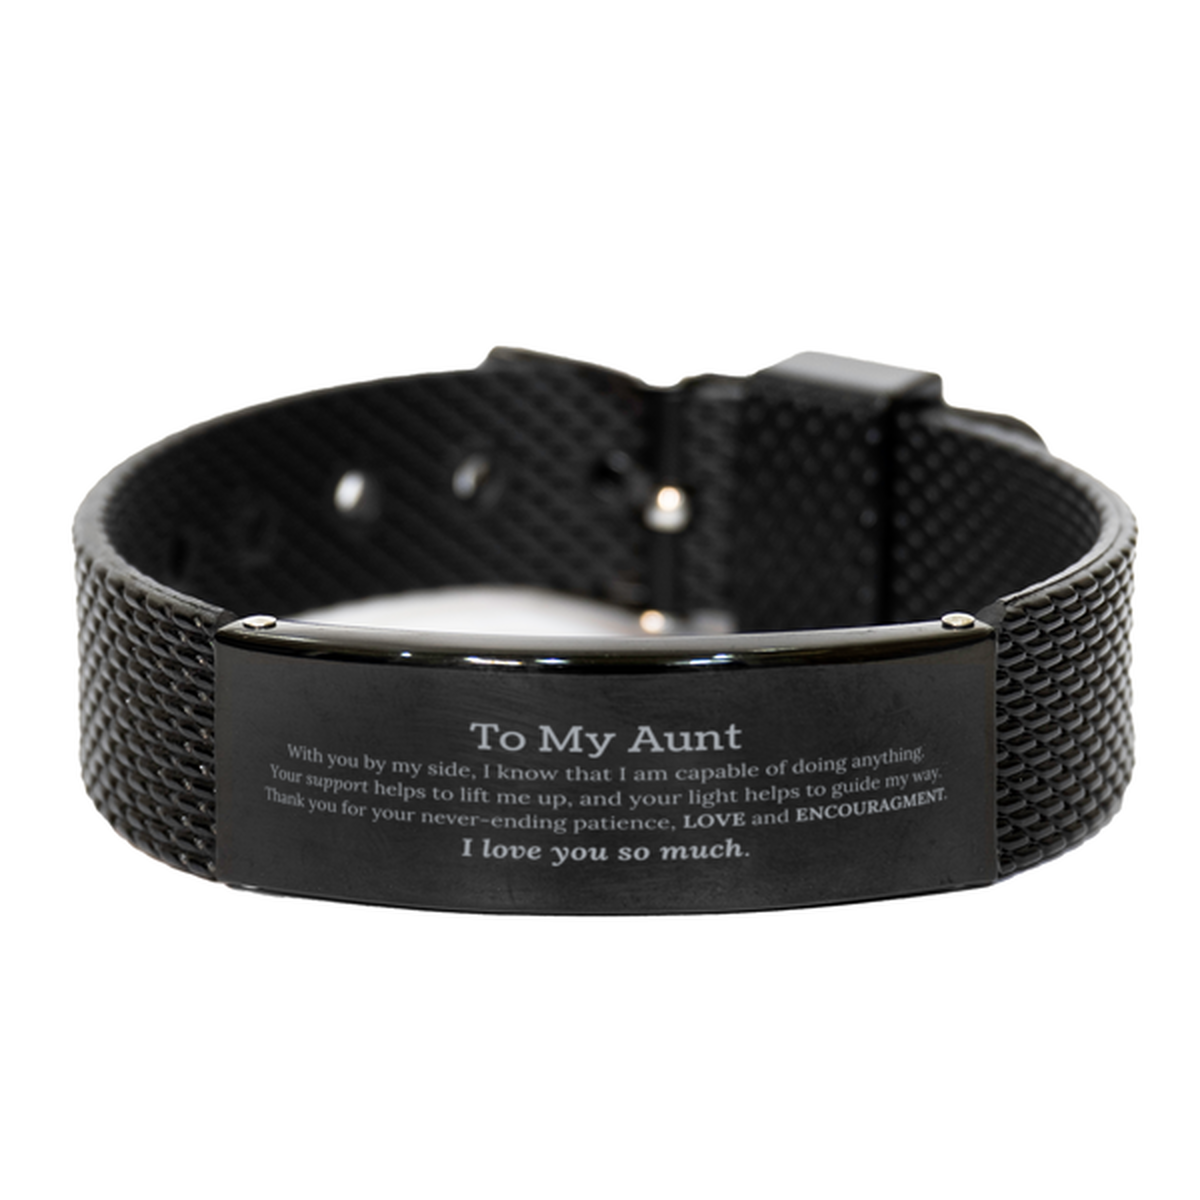 Appreciation Aunt Black Shark Mesh Bracelet Gifts, To My Aunt Birthday Christmas Wedding Keepsake Gifts for Aunt With you by my side, I know that I am capable of doing anything. I love you so much